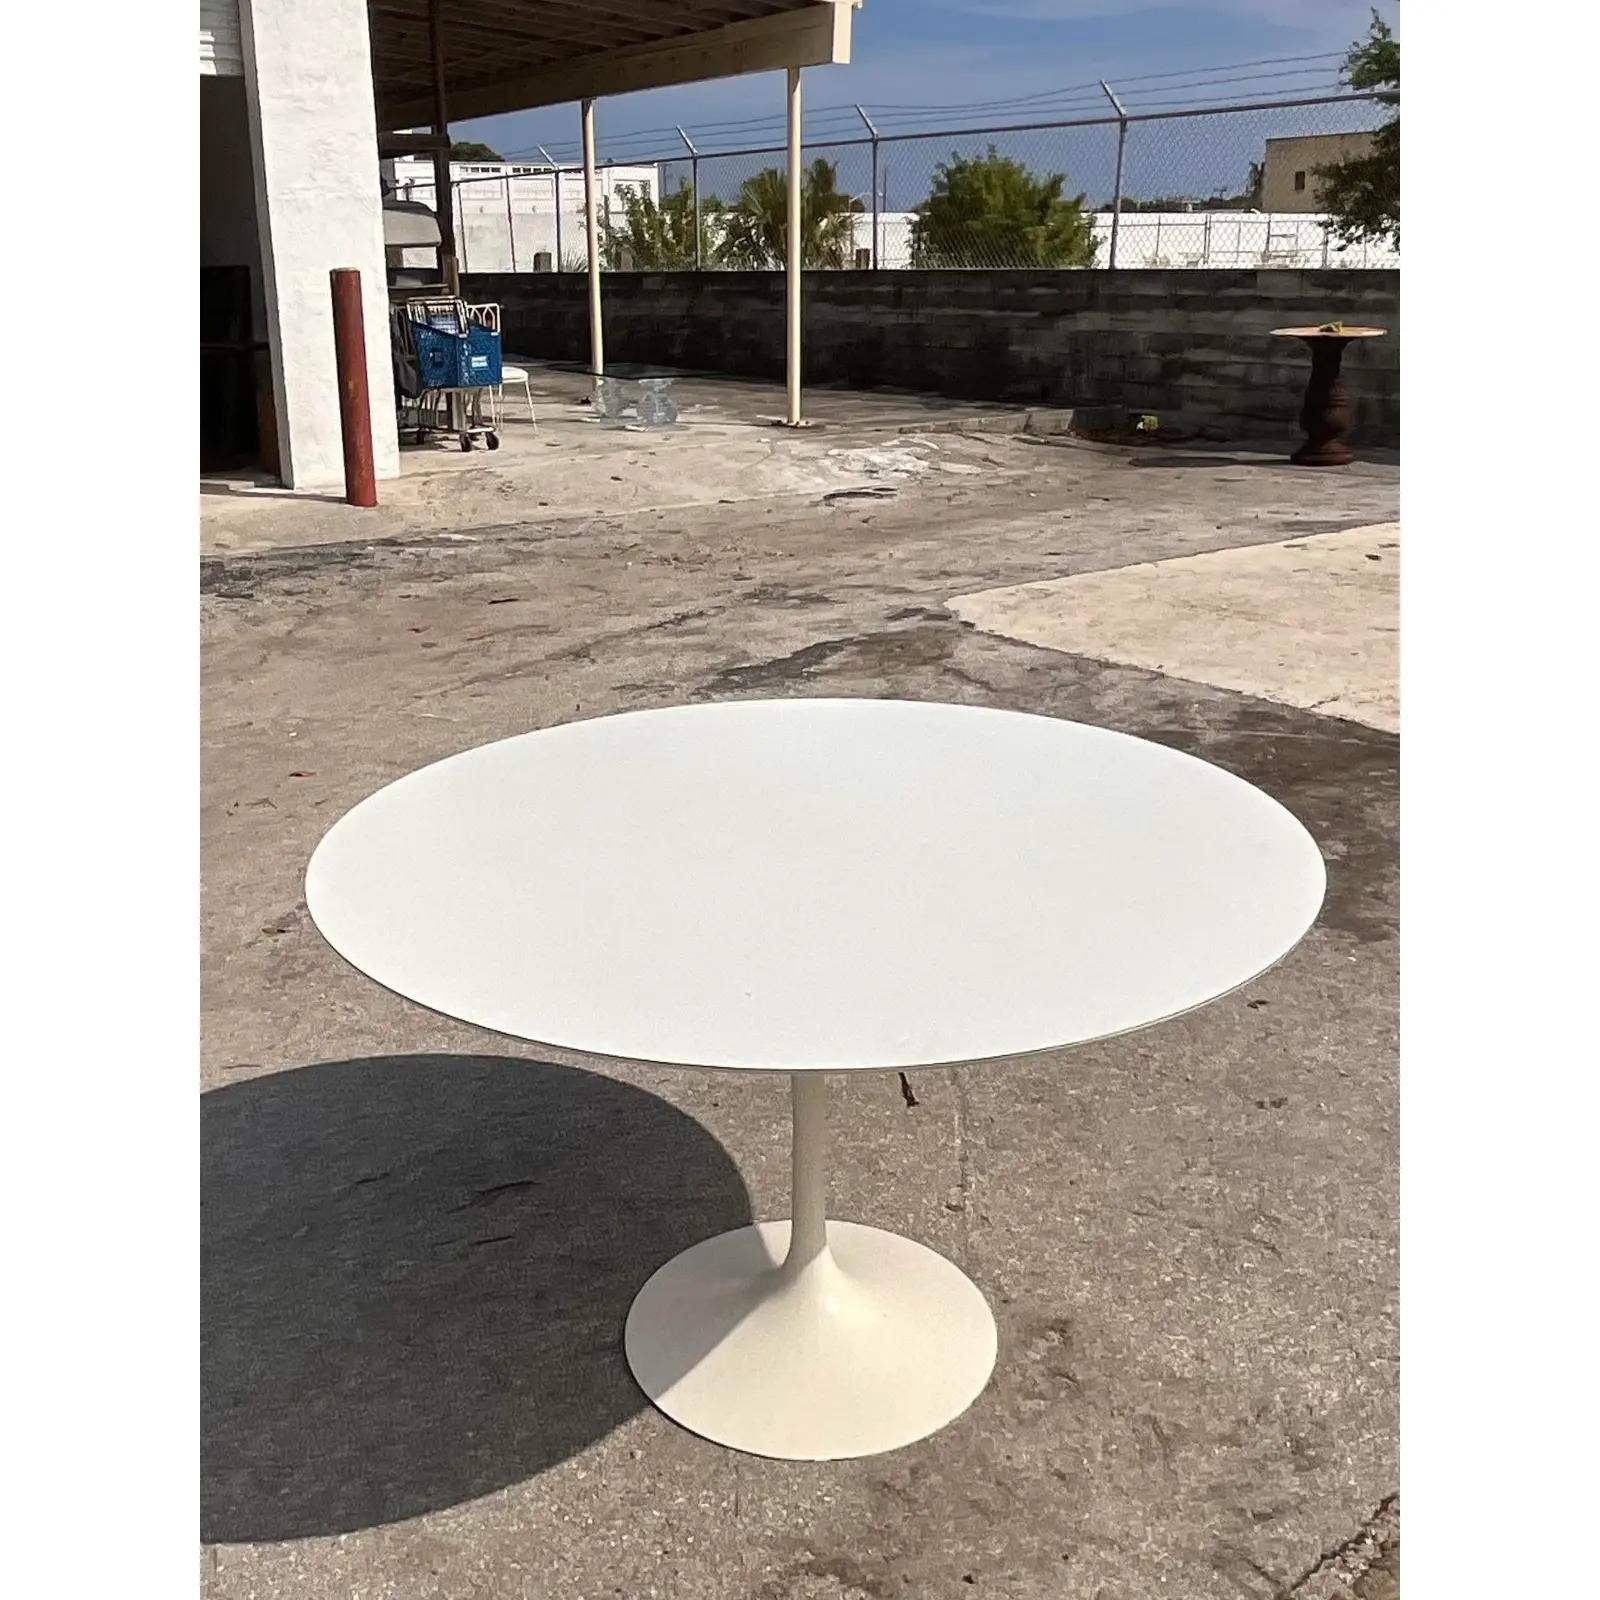 Fantastic vintage MCM dining table. Designed by Eero Saarinen for Knoll International. The iconic tulip shape with a classic round top. Purchased directly from Knoll in NYC. Made in Italy. Acquired from a Palm Beach estate.